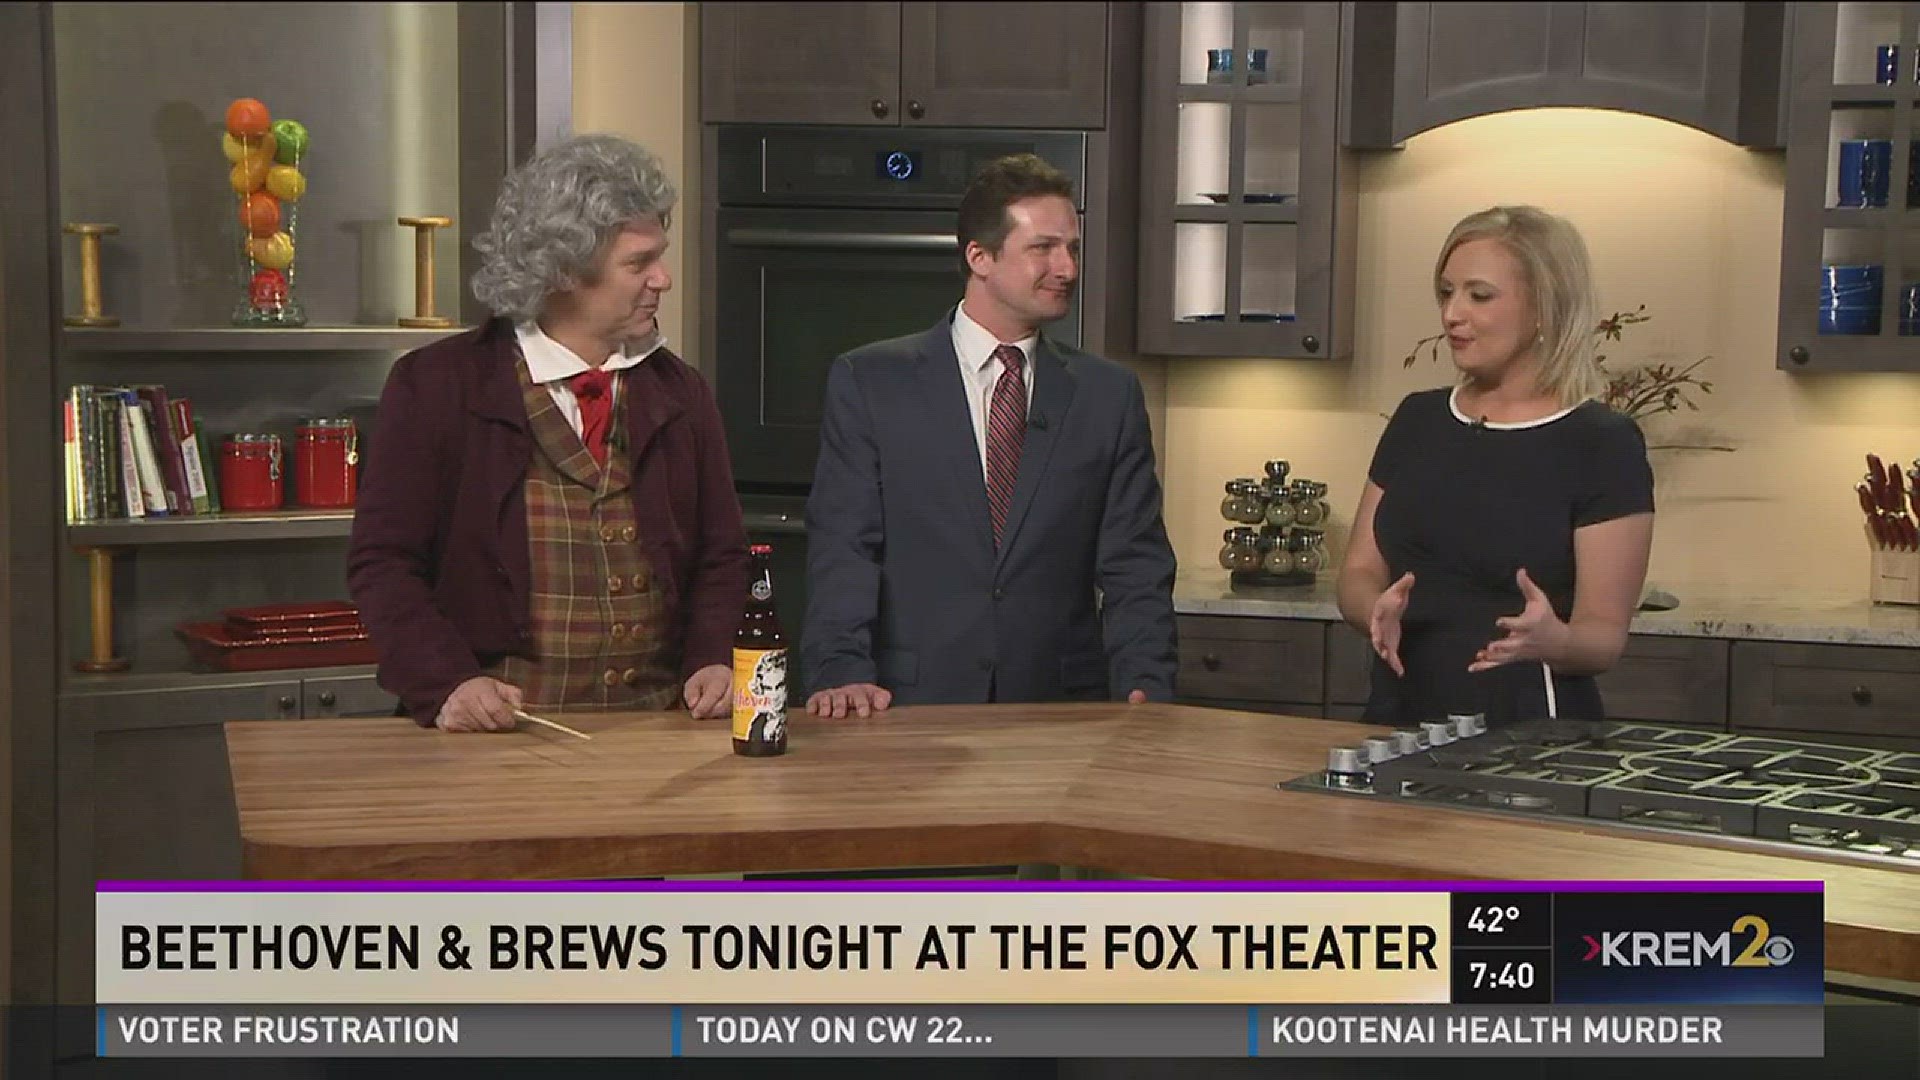 Beethoven and Brews at the Fox Theater